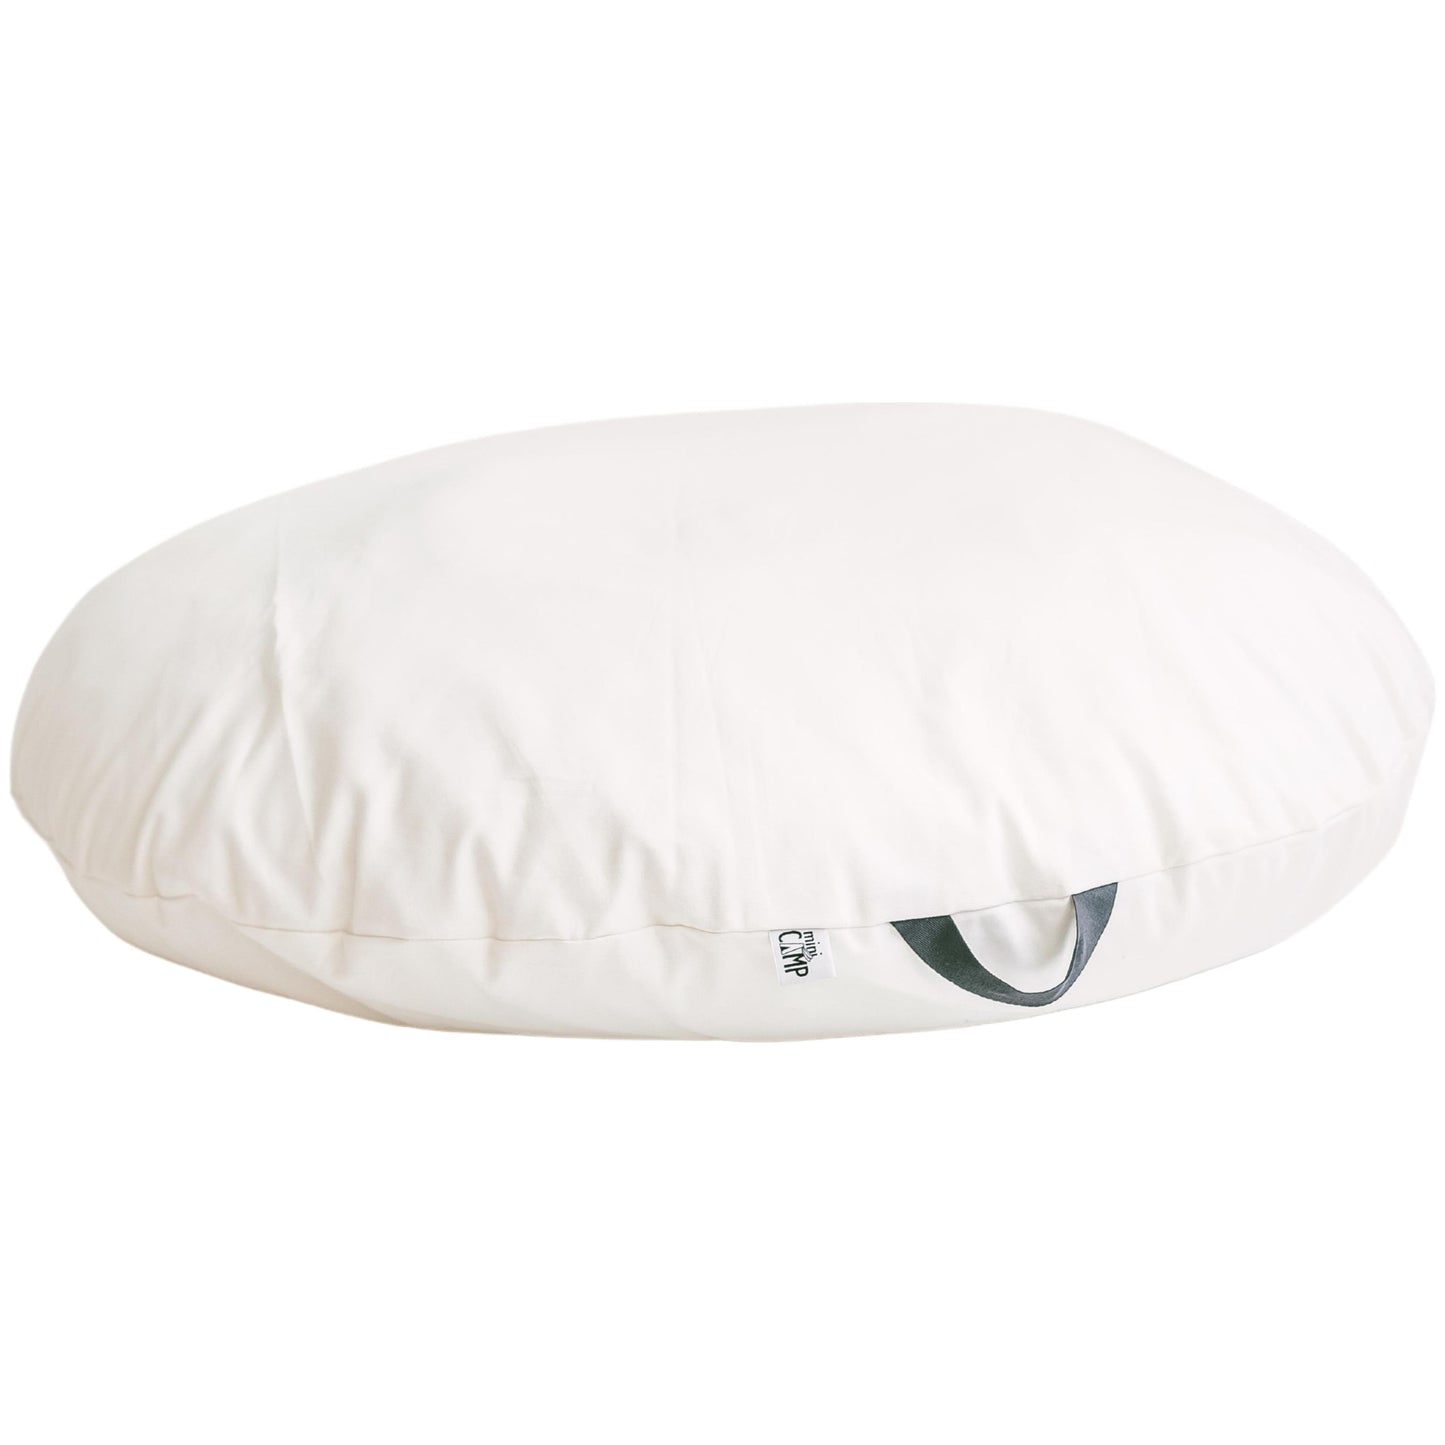 MINICAMP Lounger Floor Pillow With Handle side